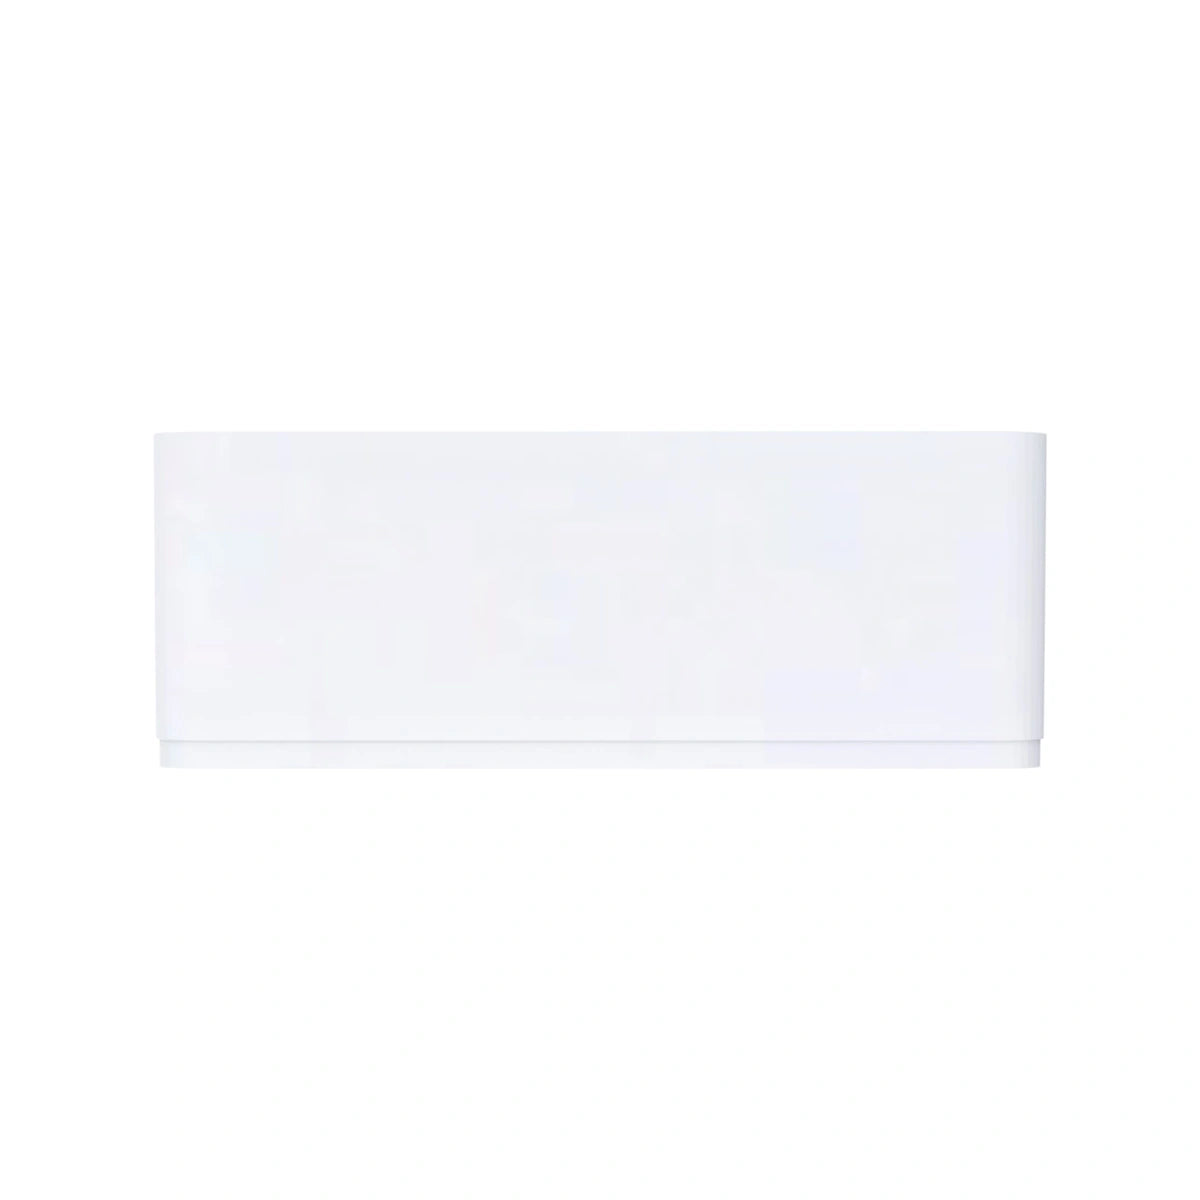 Independiente Tub Glow - 62.99 in. x 28.74 in. - blanco mate